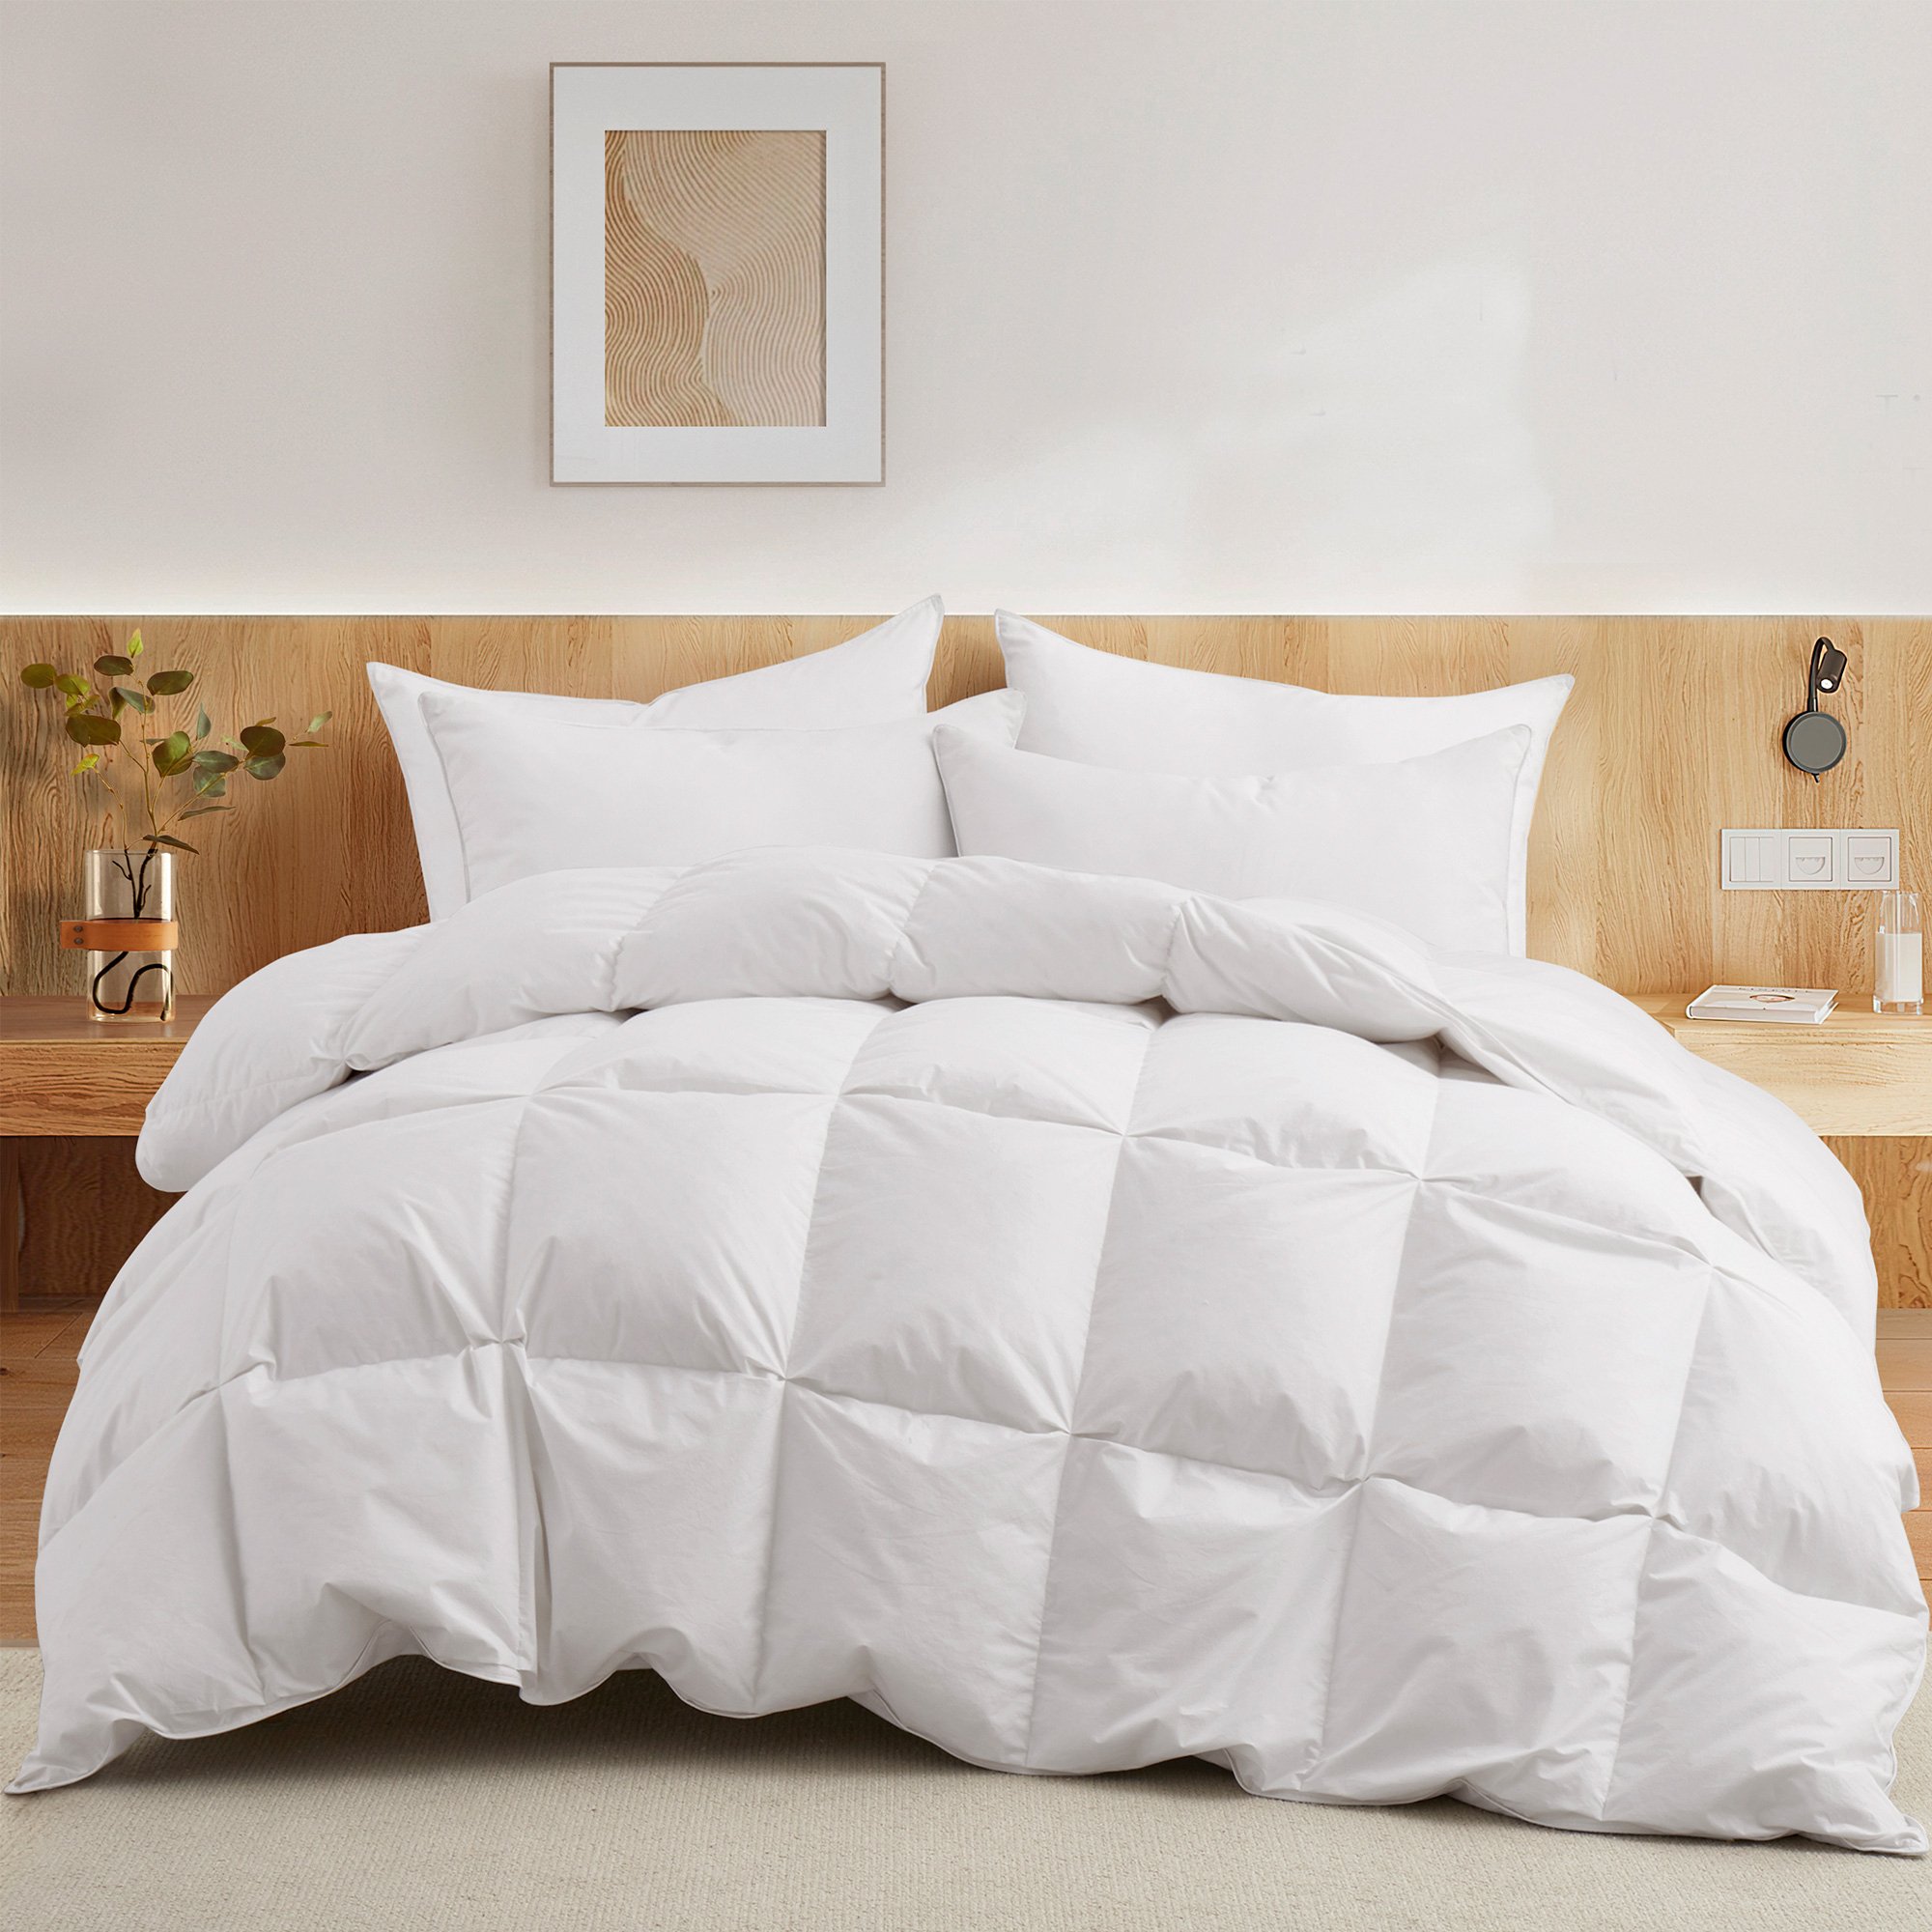 All Seasons Goose Down Comforter With Cotton Cover Baffled Box Design-Luxury Duvet Insert - Full/Queen-90*90